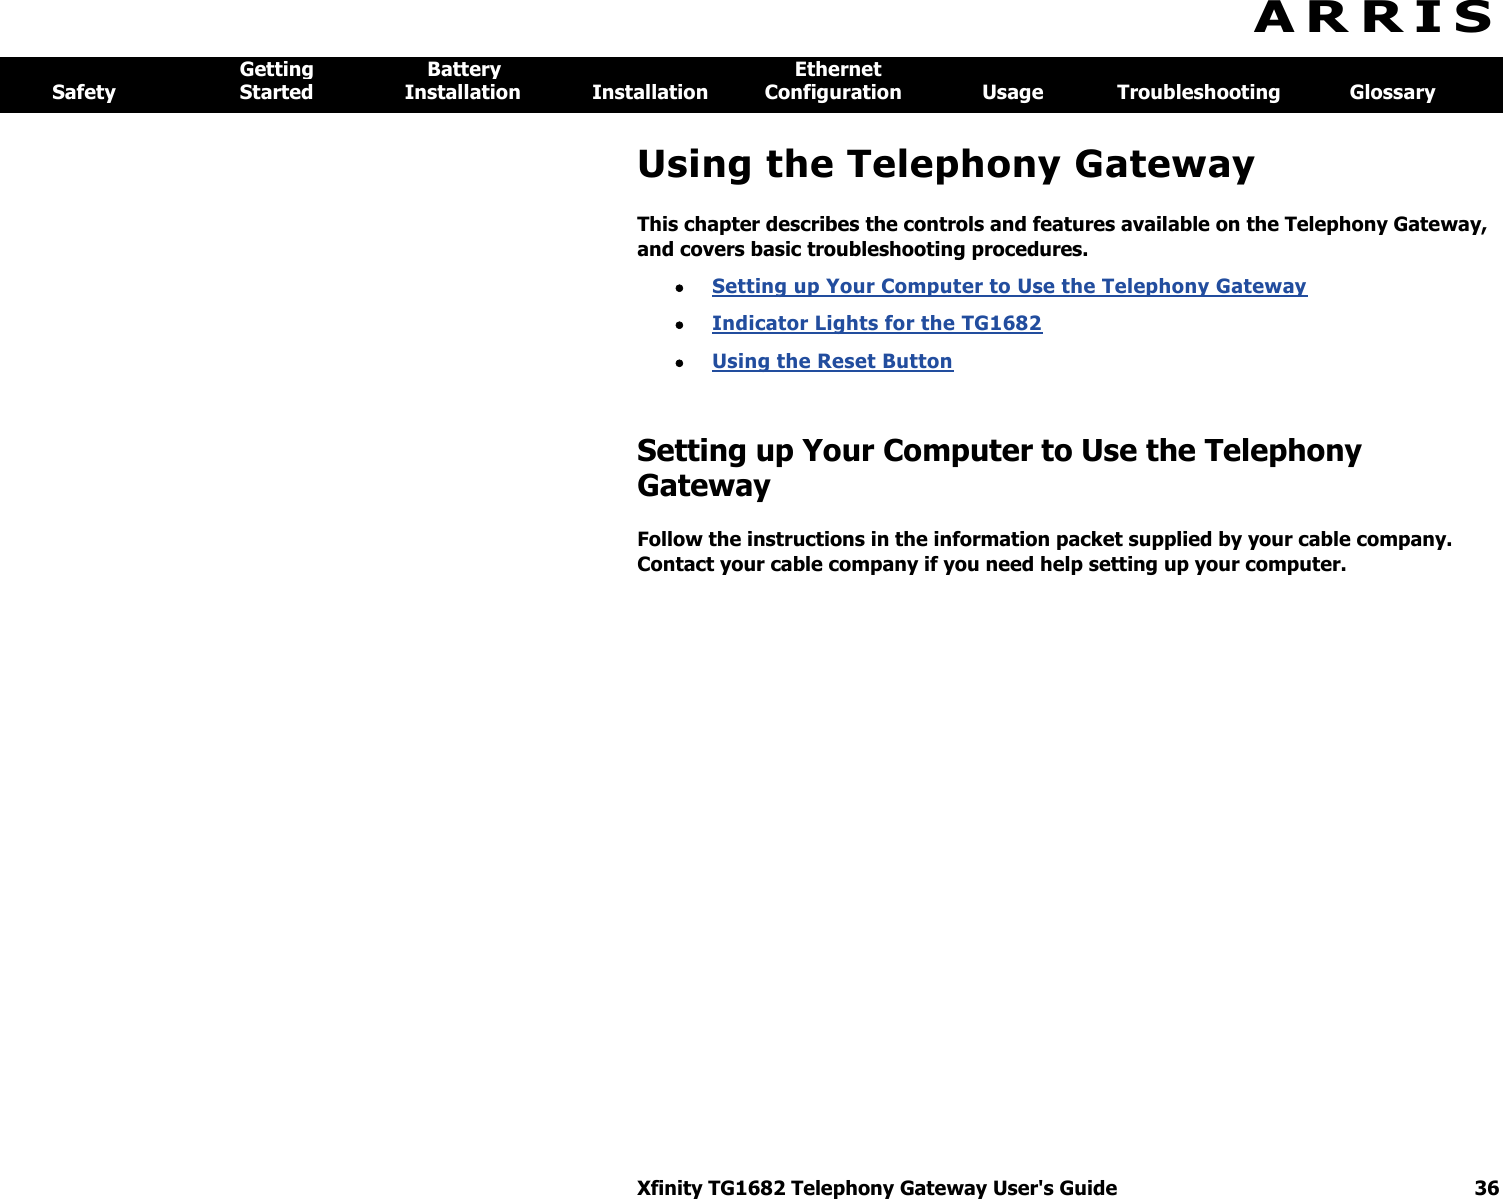 Xfinity TG1682 Telephony Gateway User&apos;s Guide  36  A R R I S  Getting  Battery  Ethernet Safety  Started  Installation  Installation  Configuration  Usage  Troubleshooting  Glossary Using the Telephony Gateway This chapter describes the controls and features available on the Telephony Gateway, and covers basic troubleshooting procedures.  Setting up Your Computer to Use the Telephony Gateway   Indicator Lights for the TG1682   Using the Reset Button  Setting up Your Computer to Use the Telephony Gateway Follow the instructions in the information packet supplied by your cable company. Contact your cable company if you need help setting up your computer. 